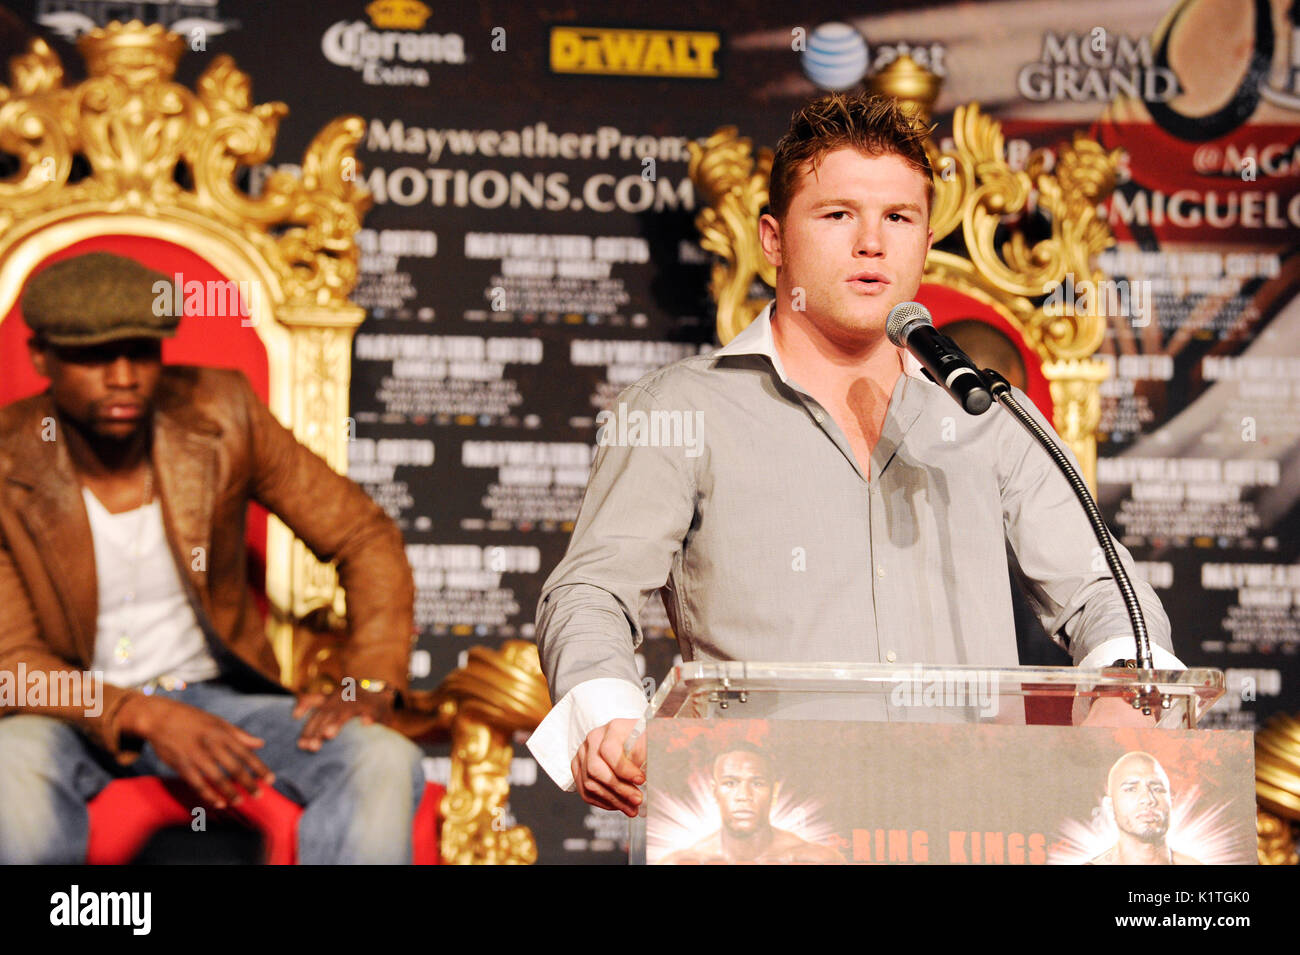 (L-R) Boxers Floyd Mayweather Canelo Alvarez attend press conference Grauman's Chinese Theatre Hollywood March 1,2012. Mayweather Cotto will meet WBA Super Welterweight World Championship fight May 5 MGM Grand Las Vegas. Stock Photo